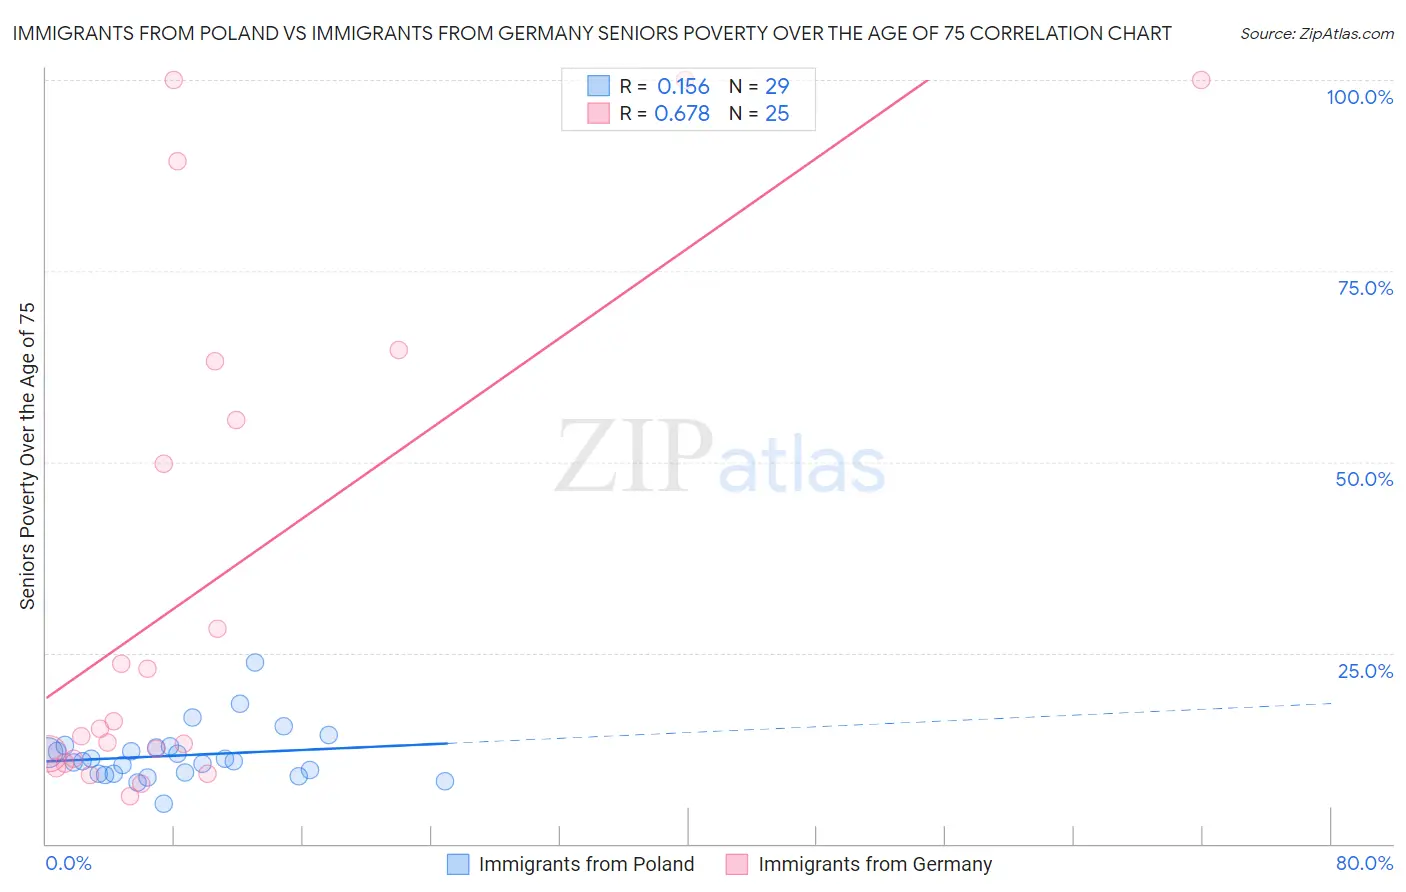 Immigrants from Poland vs Immigrants from Germany Seniors Poverty Over the Age of 75